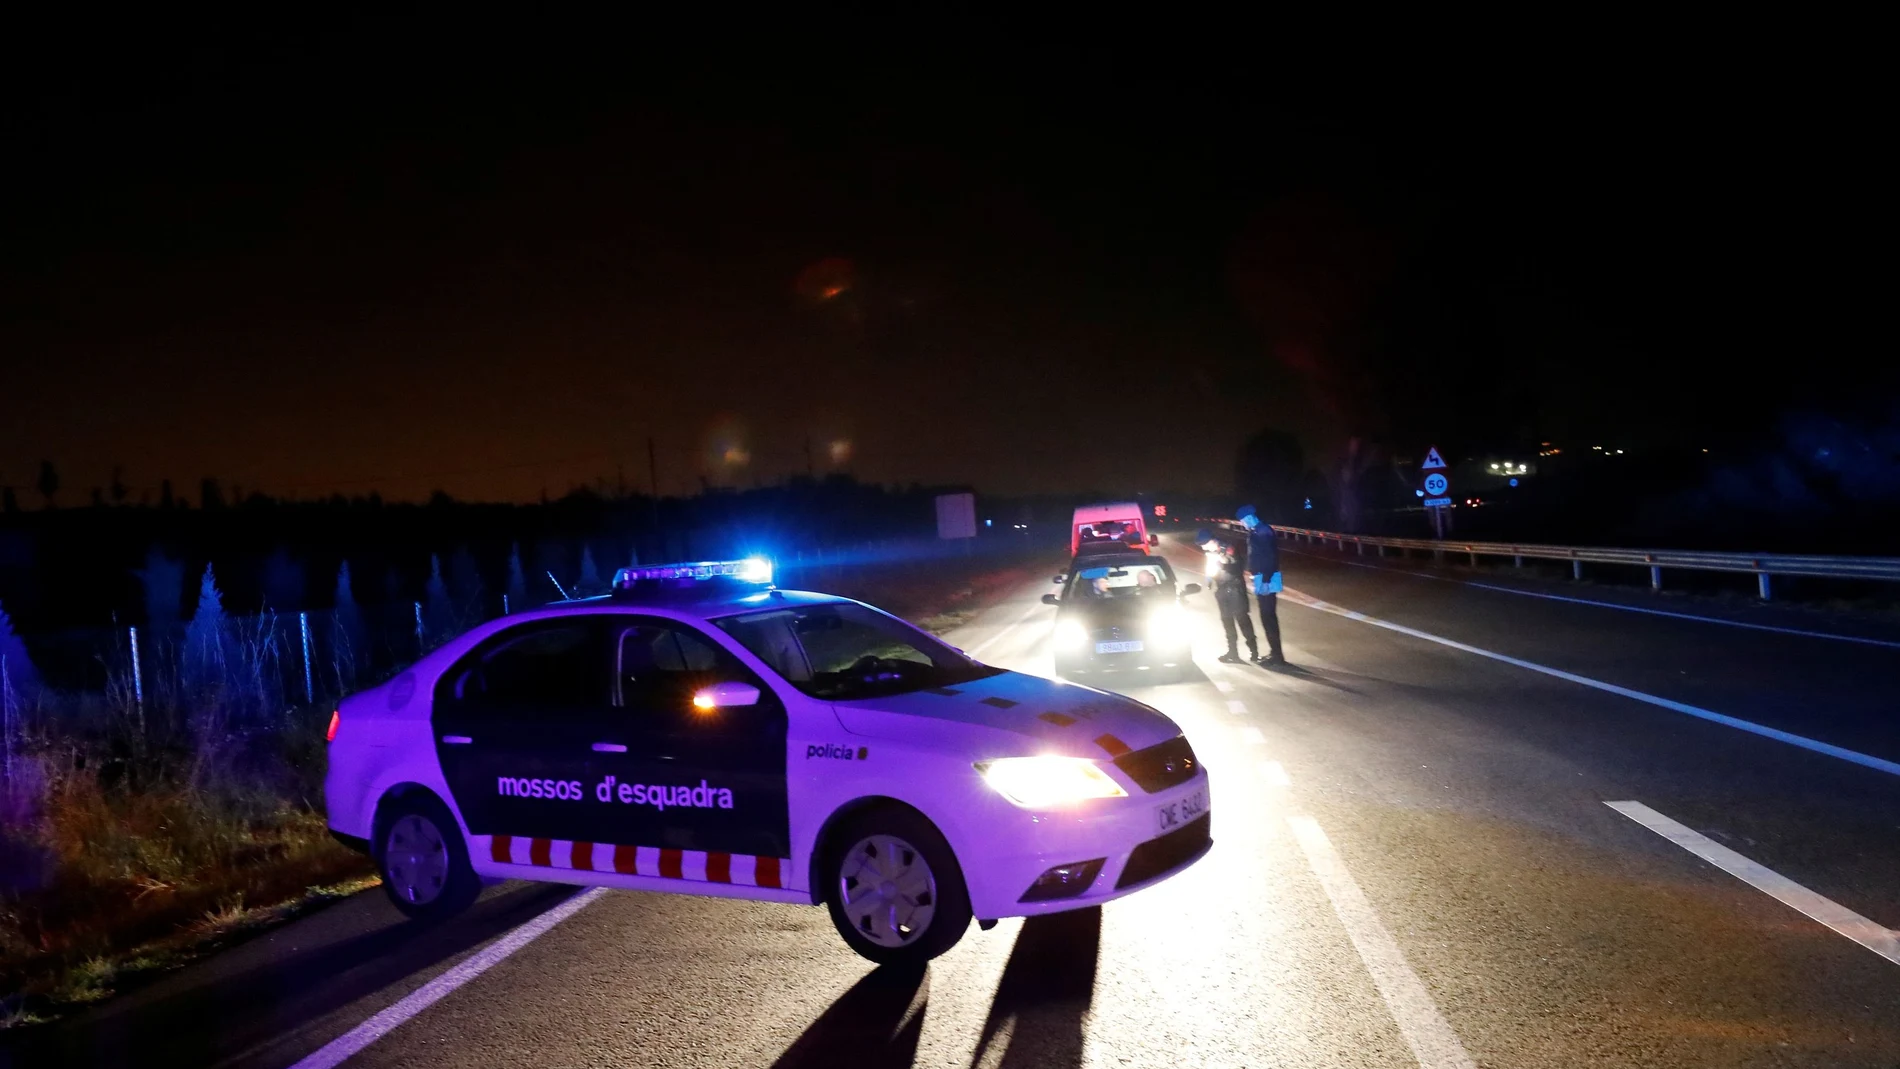 Police officers check the documents of drivers and passengers leaving the village of Igualada after Spain placed four towns around the village under quarantine and indefinite lockdown, following a significant outbreak of the coronavirus (COVID-19) in the area, north of Barcelona, Spain March 12, 2020. REUTERS/Nacho Doce